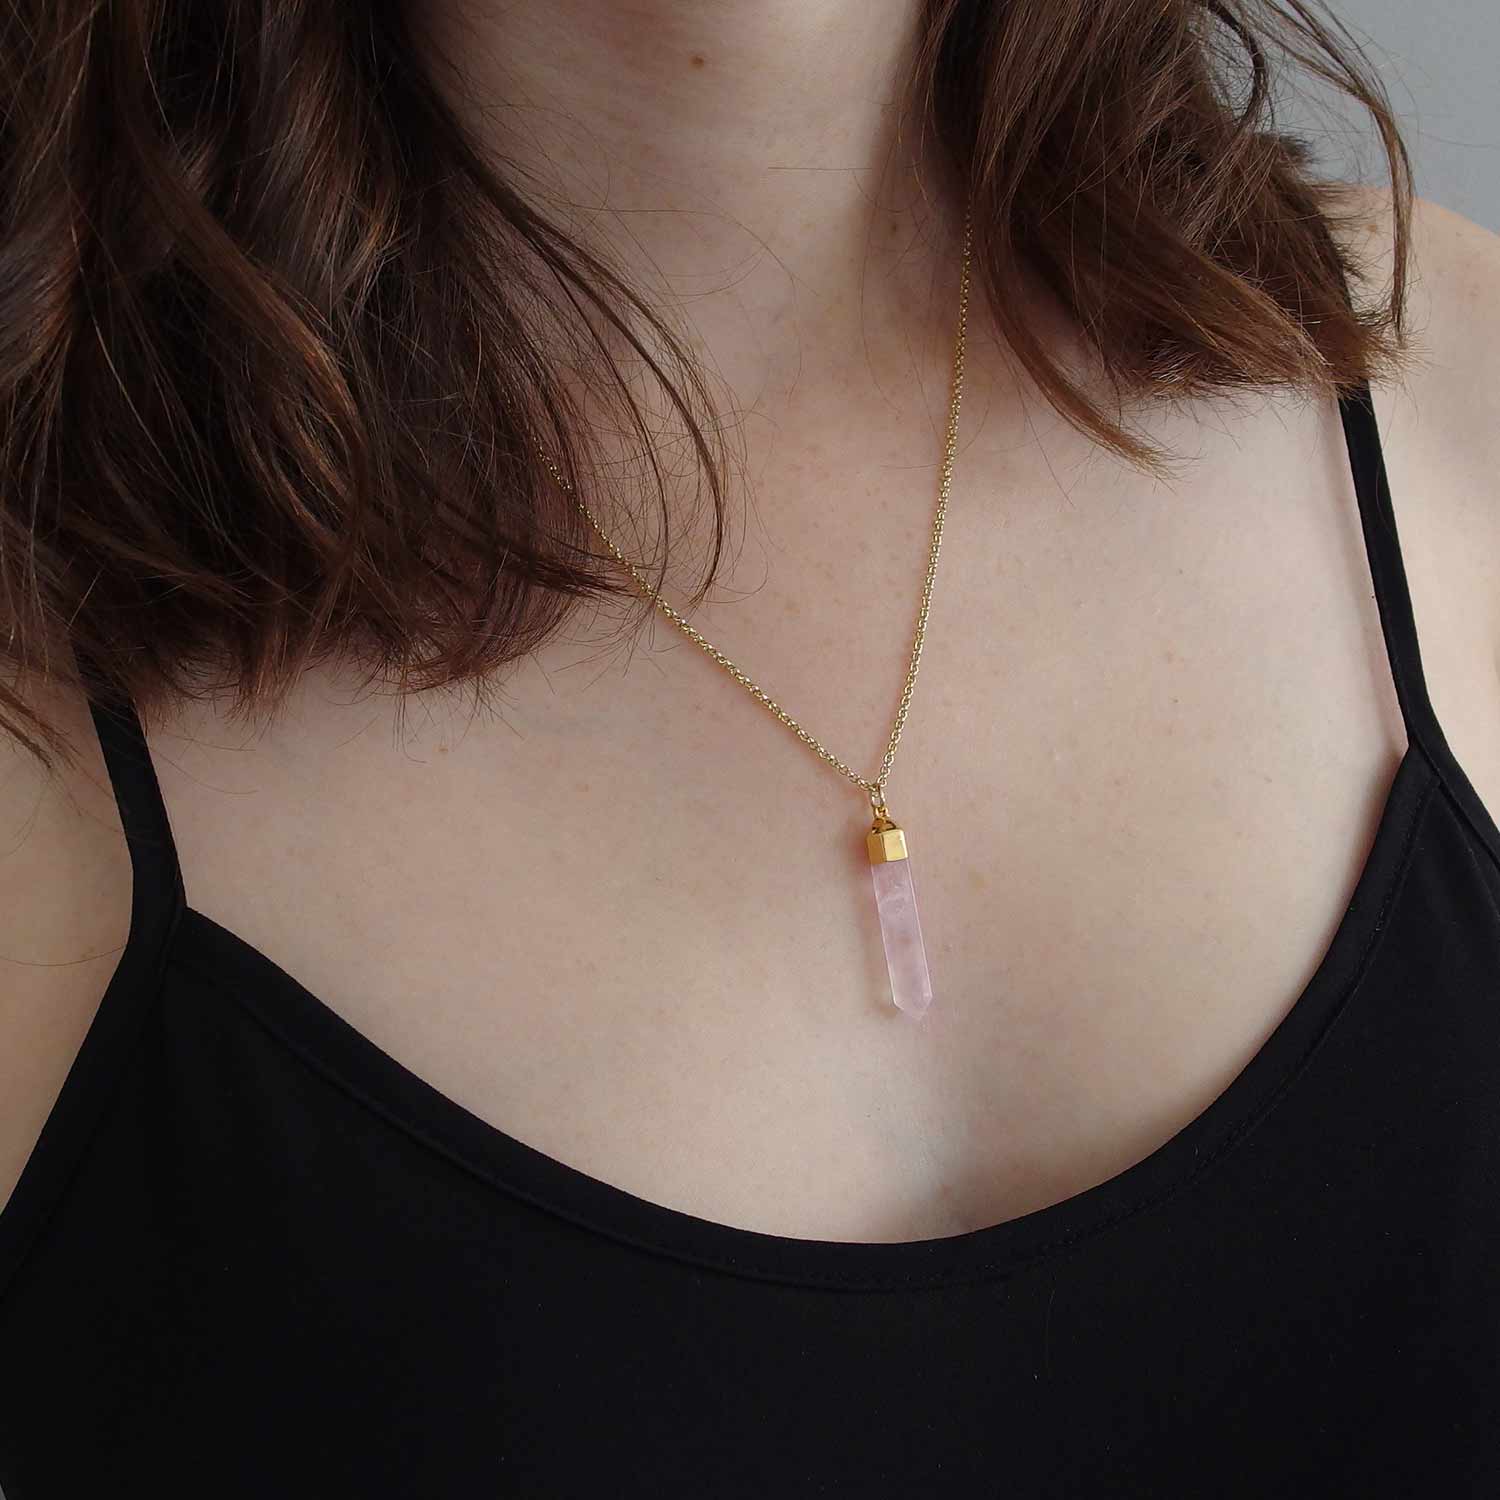 2023 Crystal Stone Holder Necklace - Free (Crystal) Gift Included, Rose Quartz / Gold